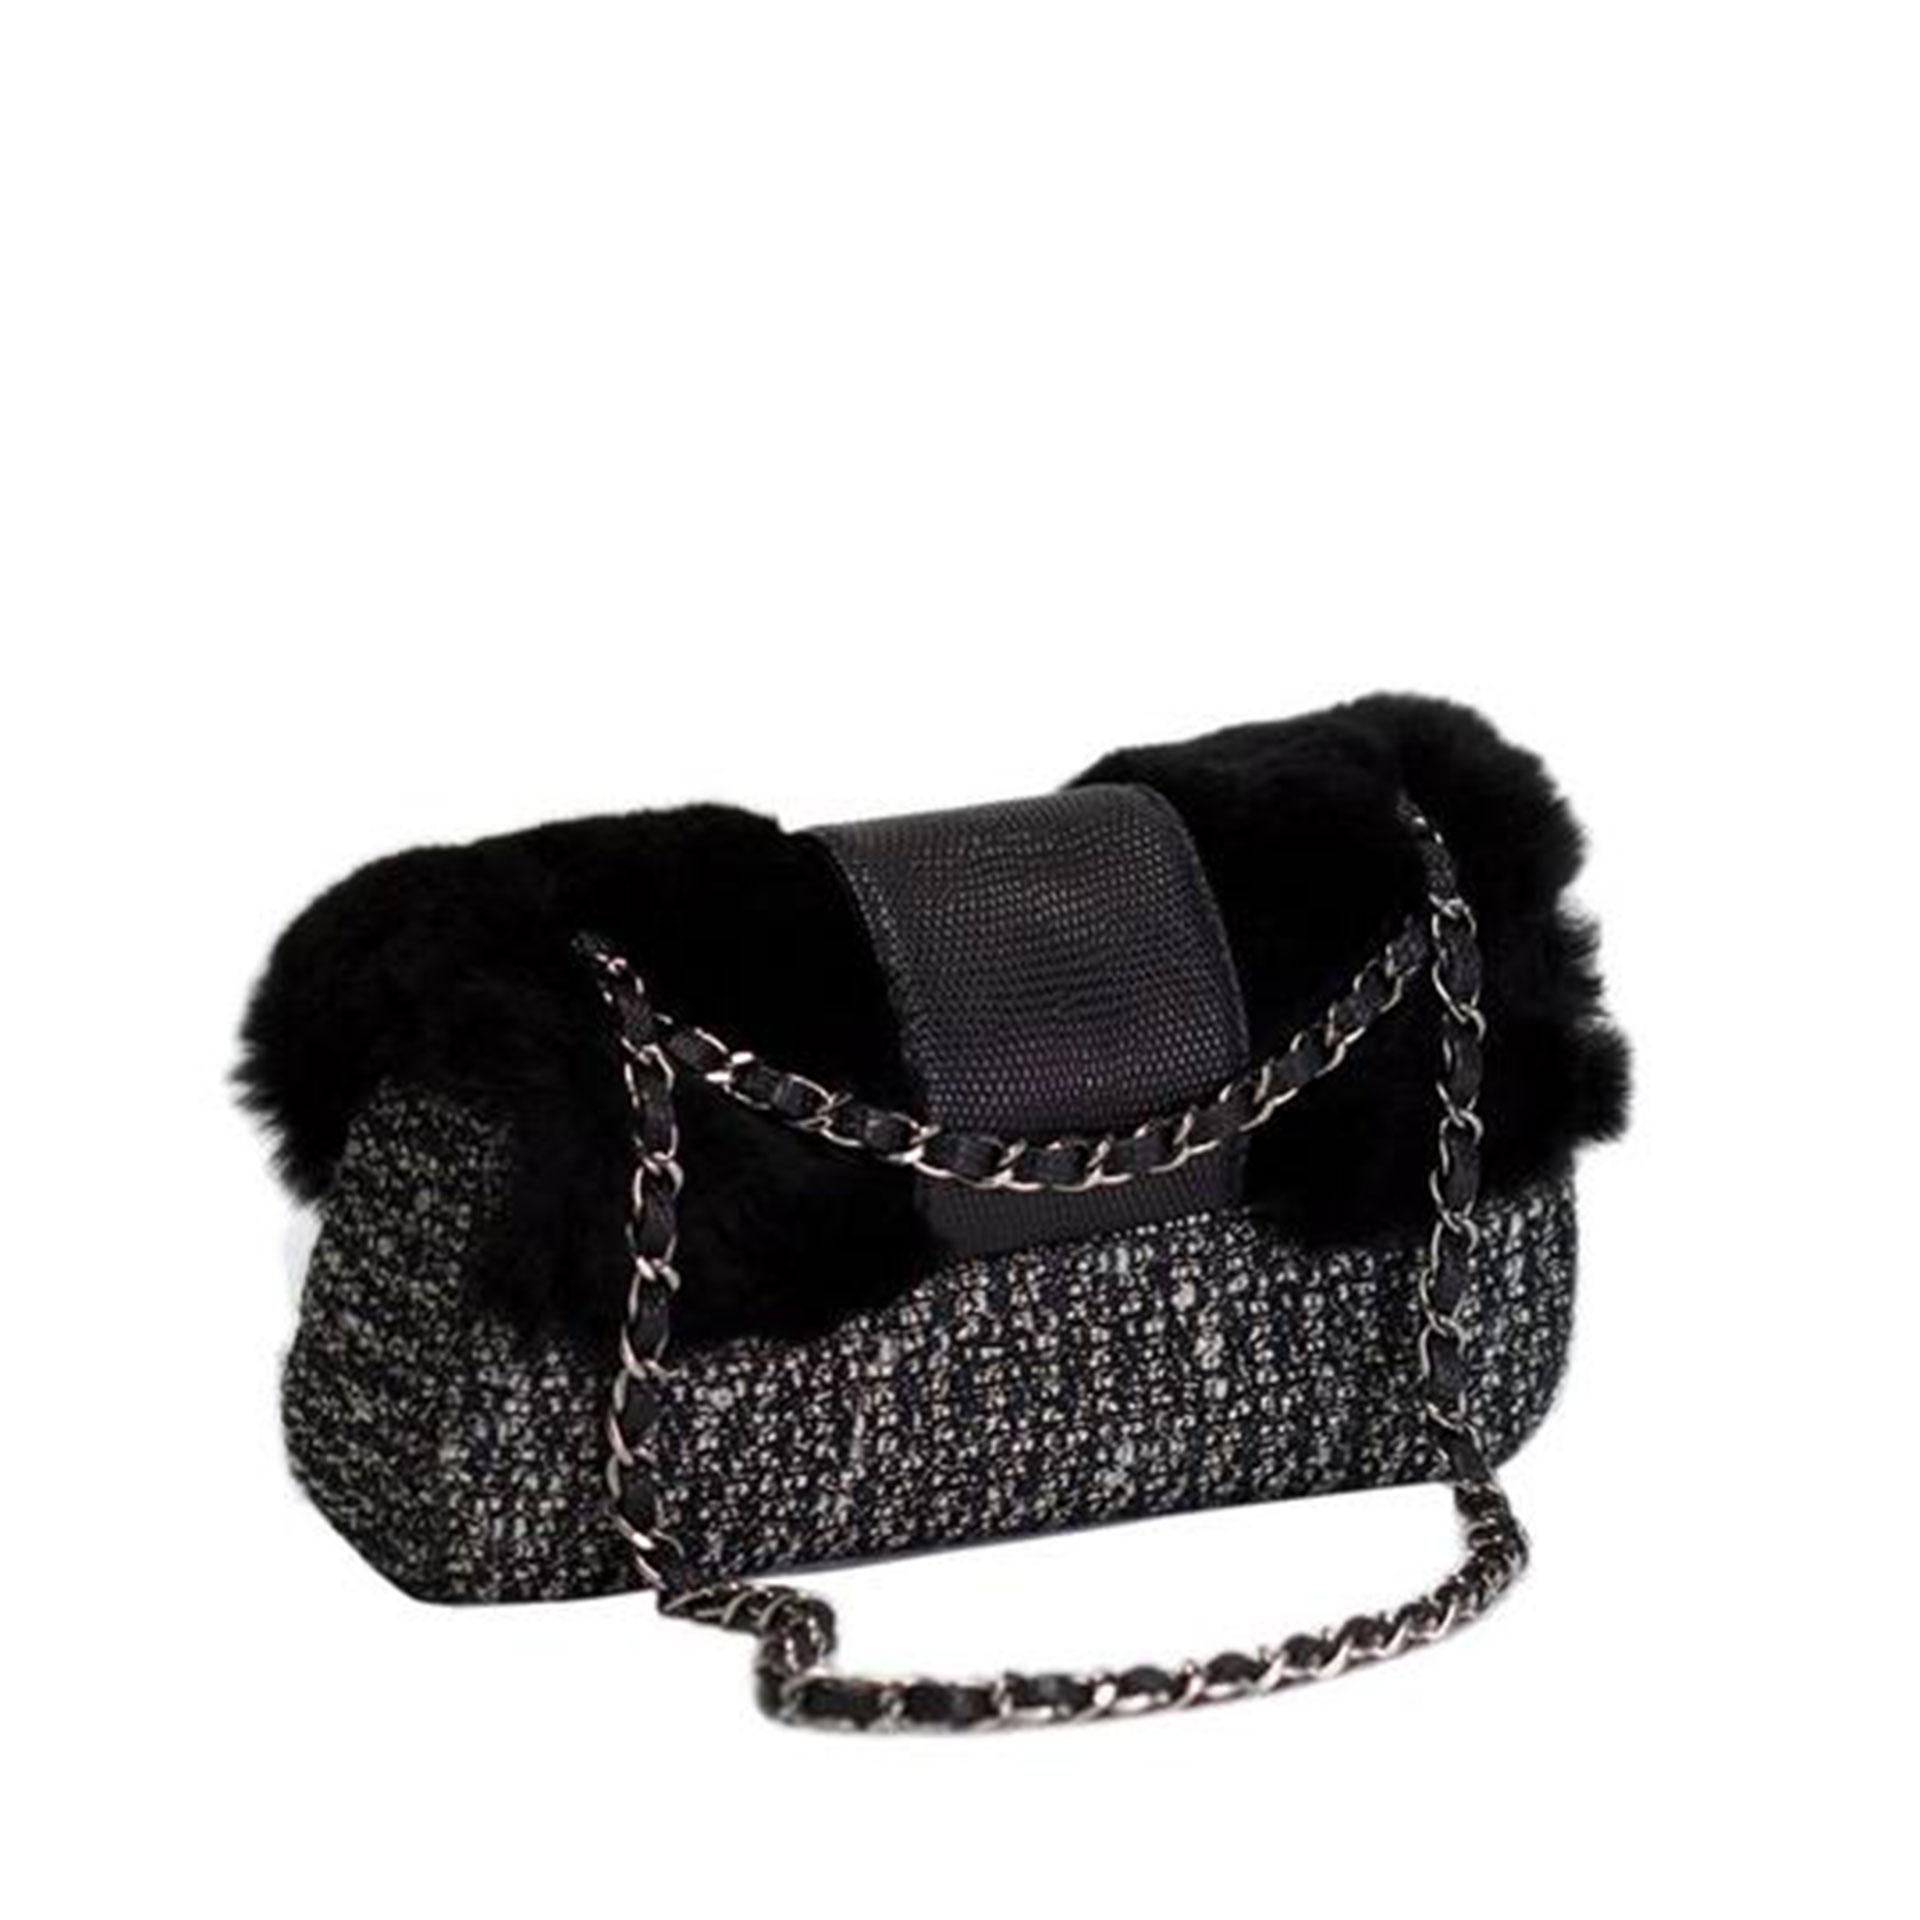 Chanel Classic Flap Limited Edition 2005 Black & White Grey Tweed Fur Lizard Bag For Sale 2